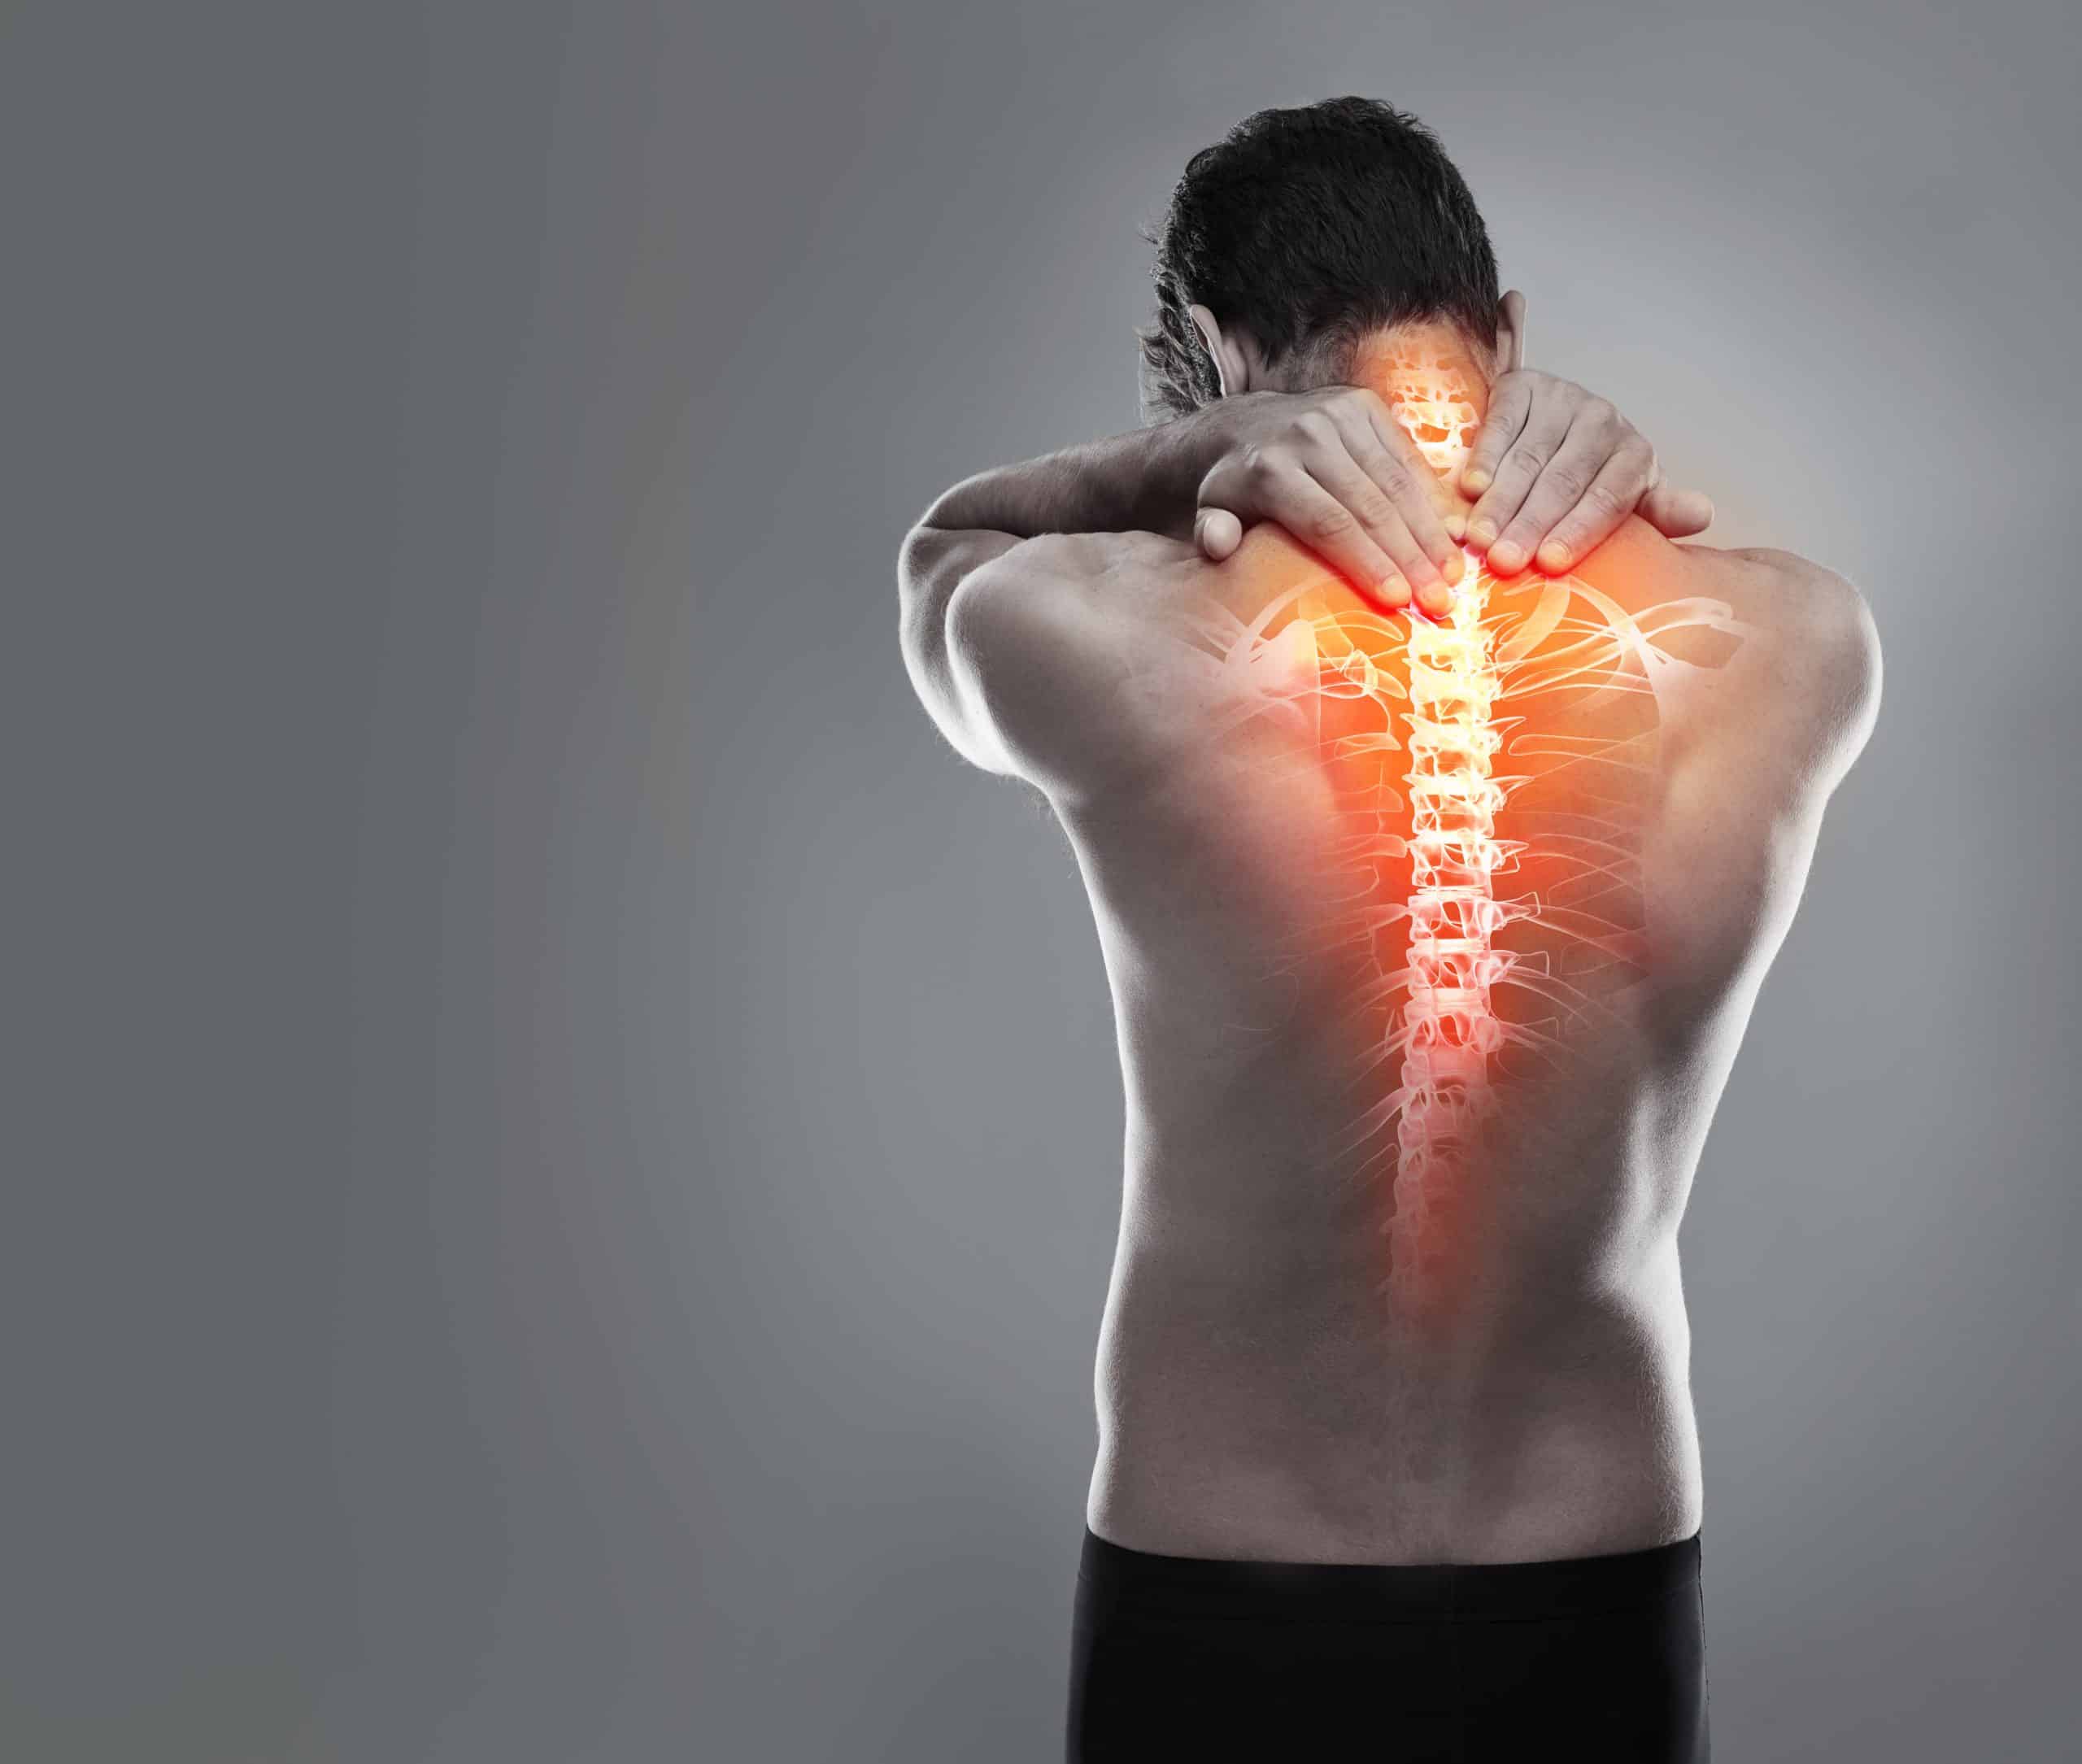 Types of neck and back injuries